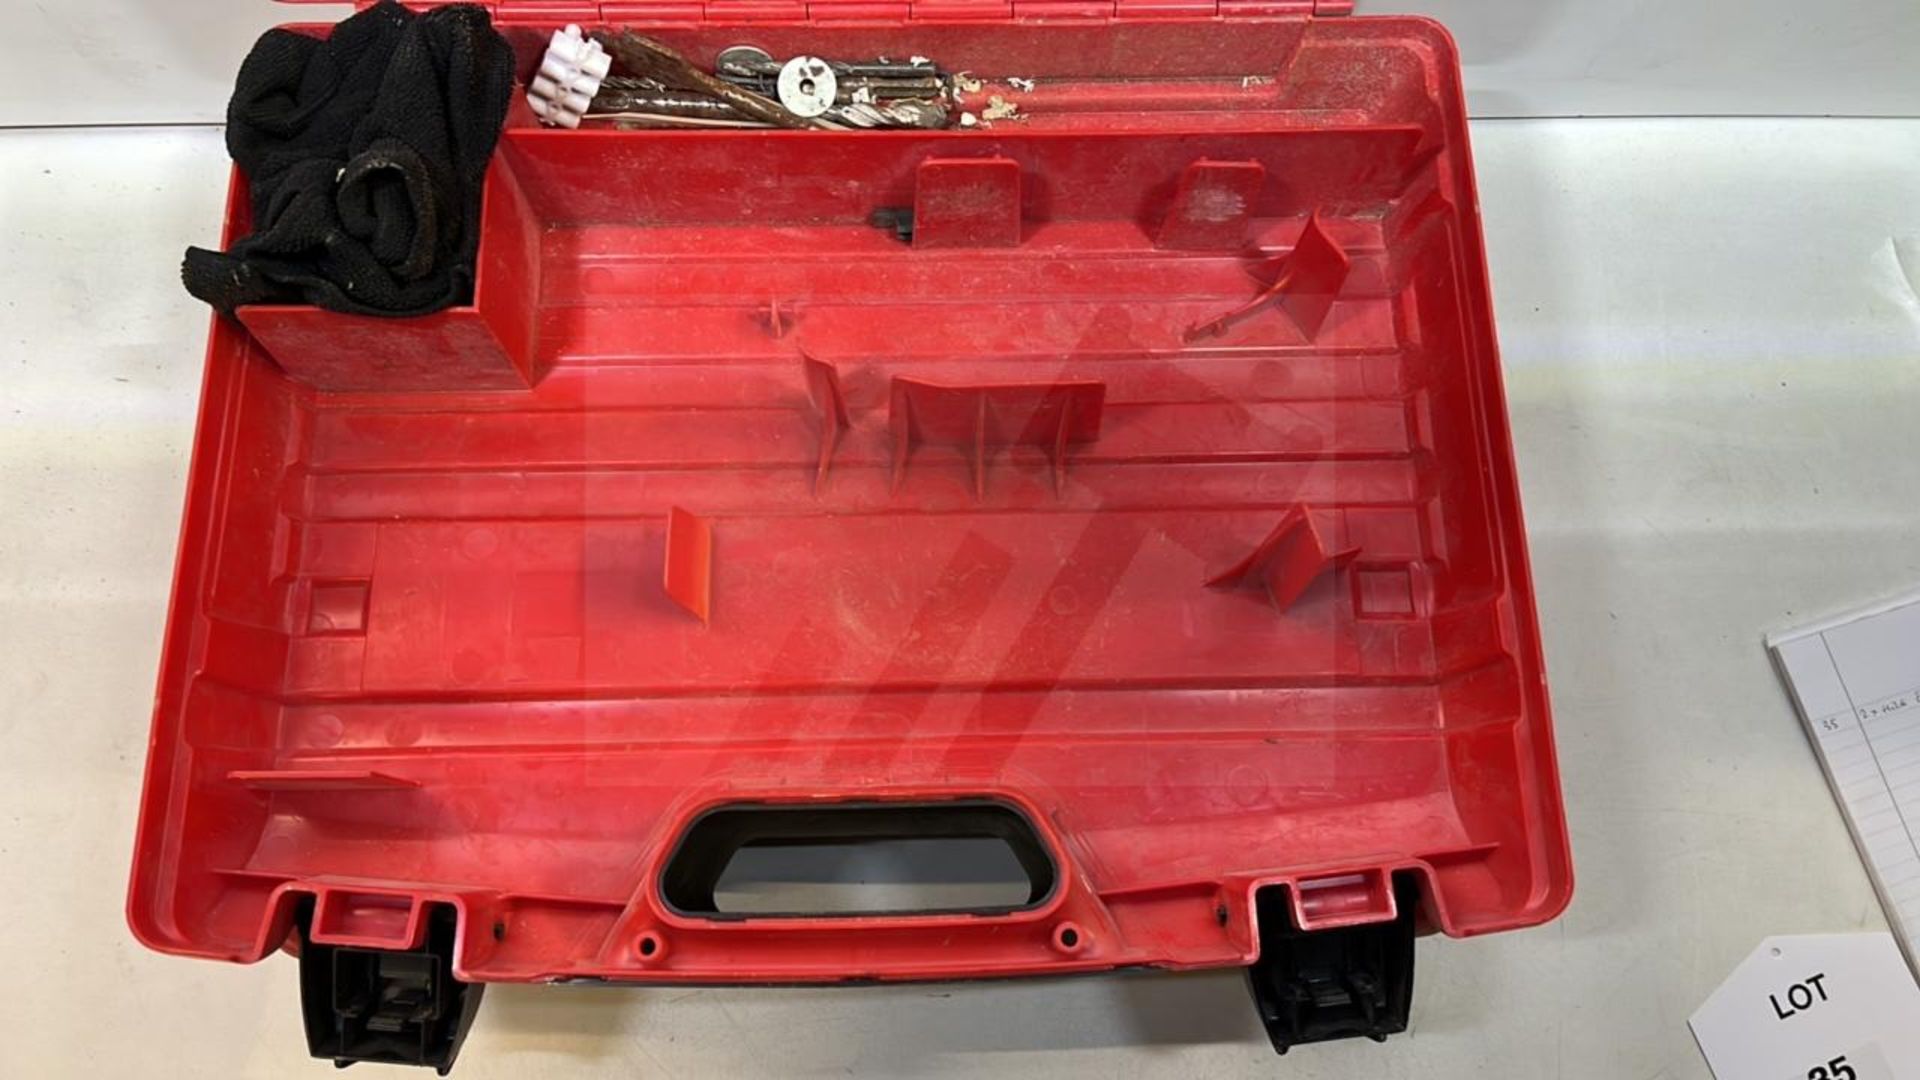 2 x Hilti Empty Drill Cases - As Pictured - Image 5 of 6